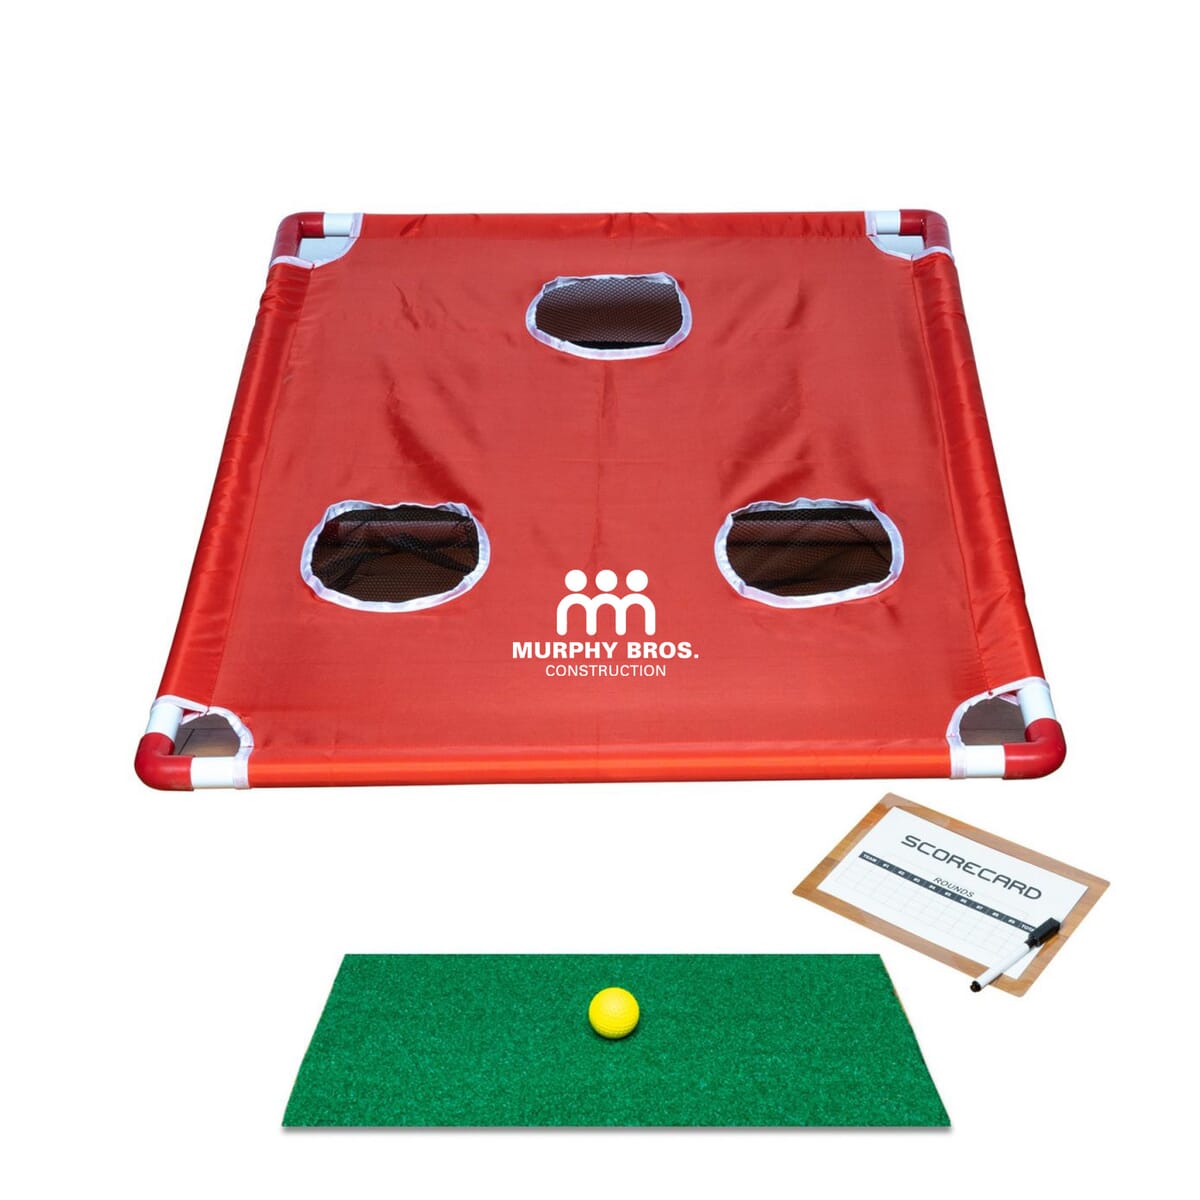 Portable Pop-Up Chip Golf Game